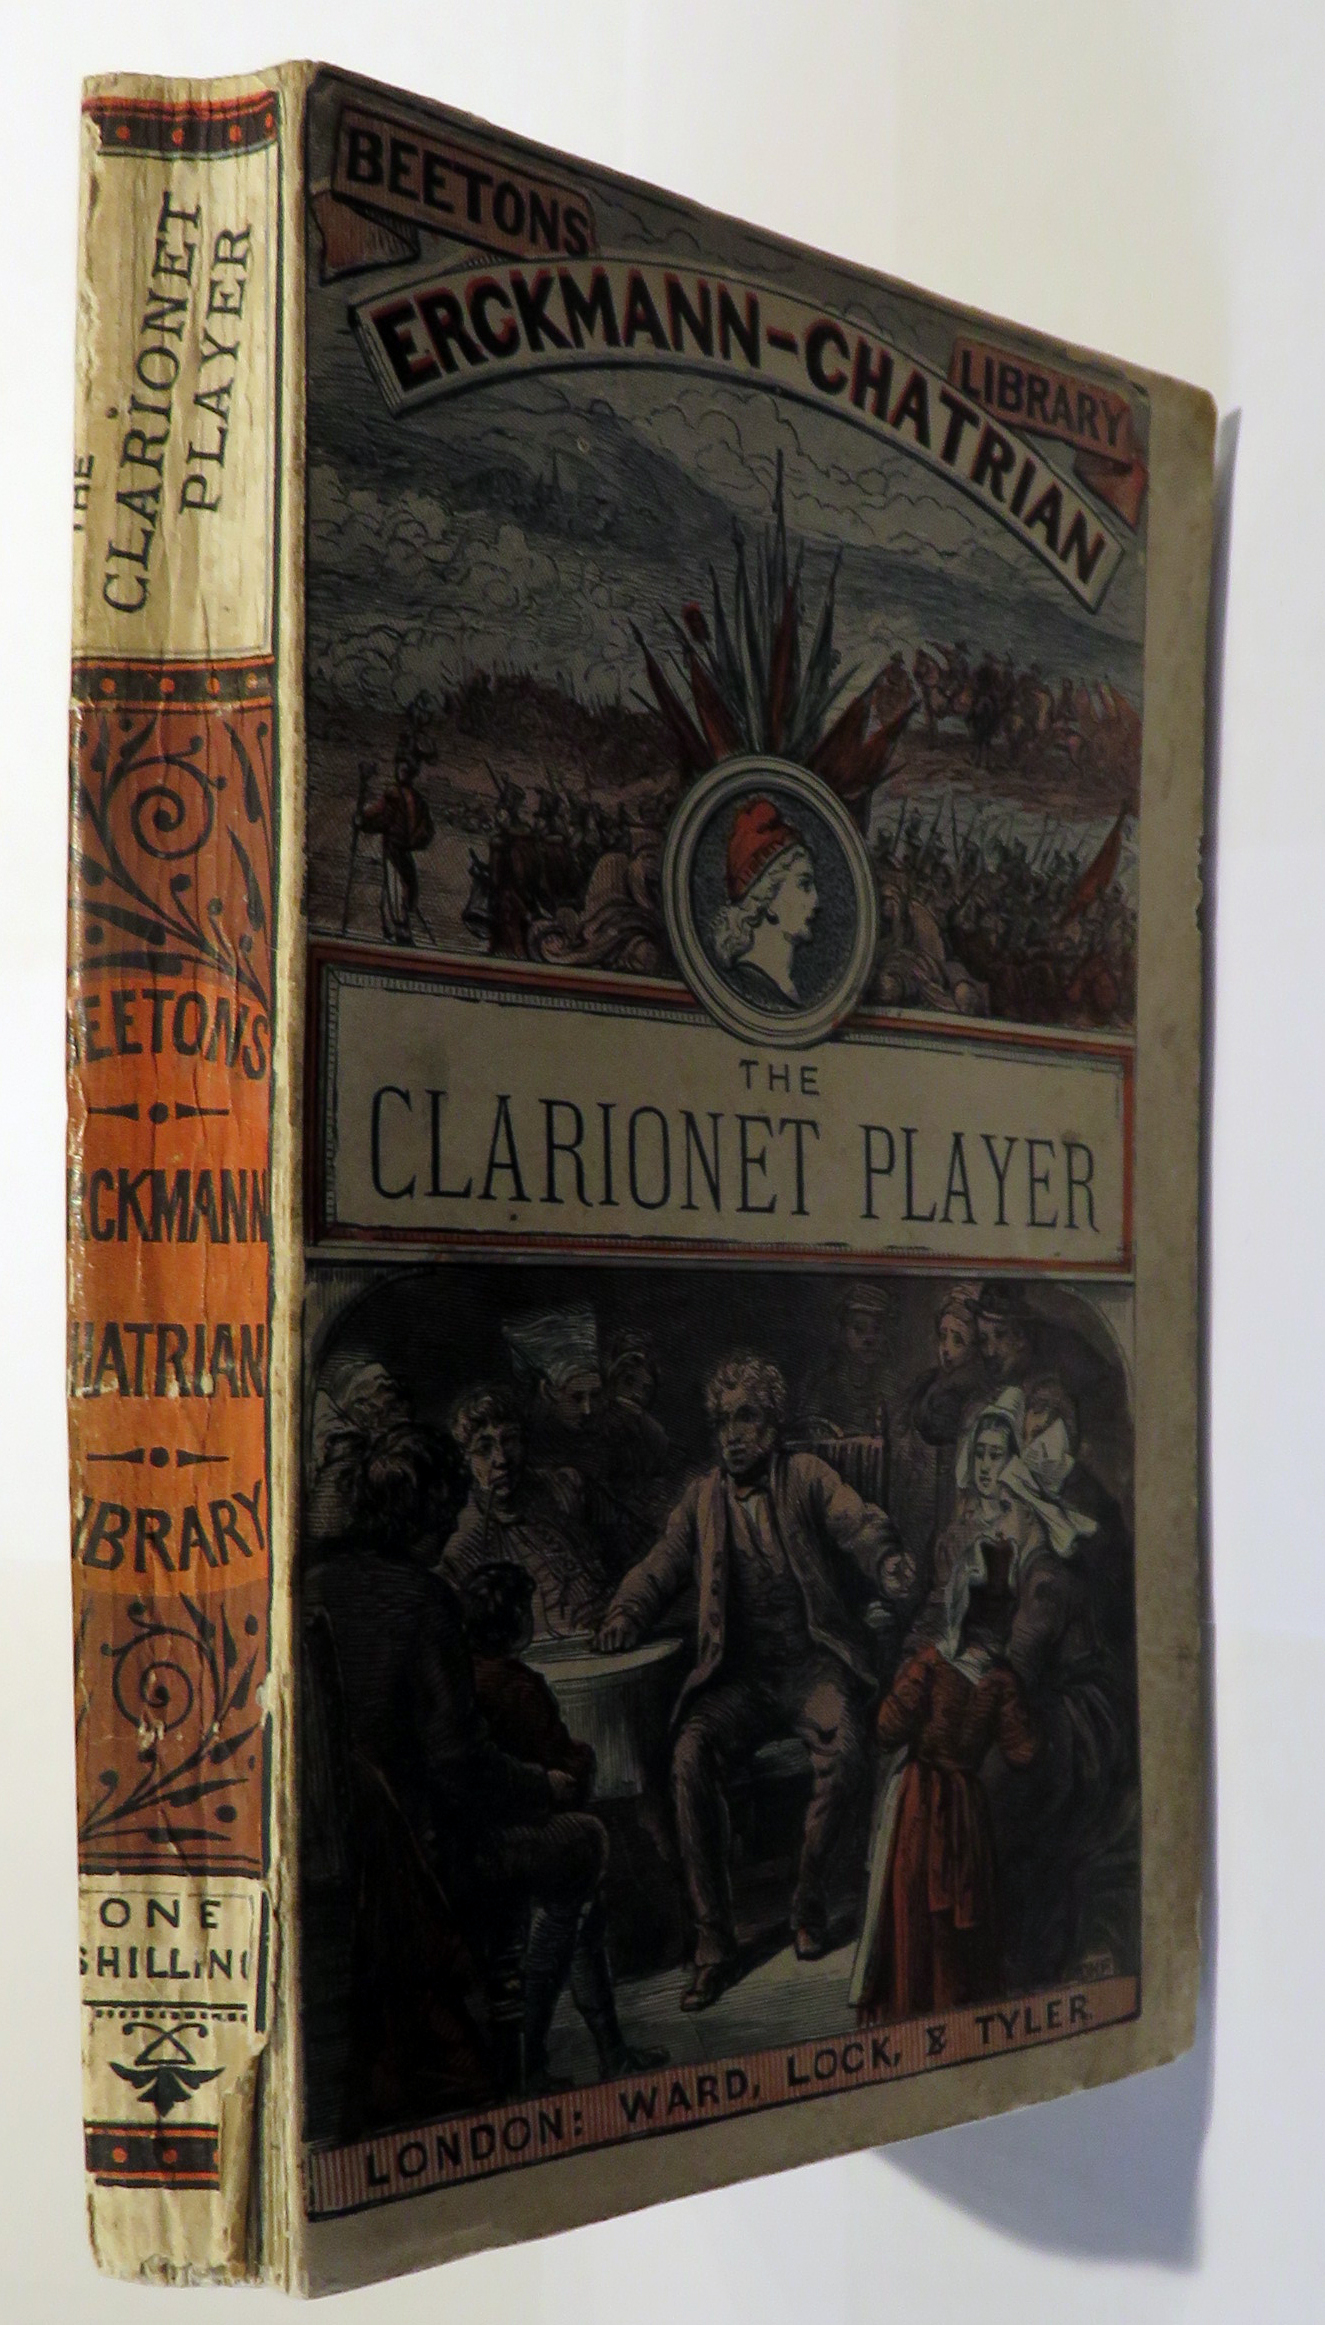 The Clarionet Player. Beeton's Library 